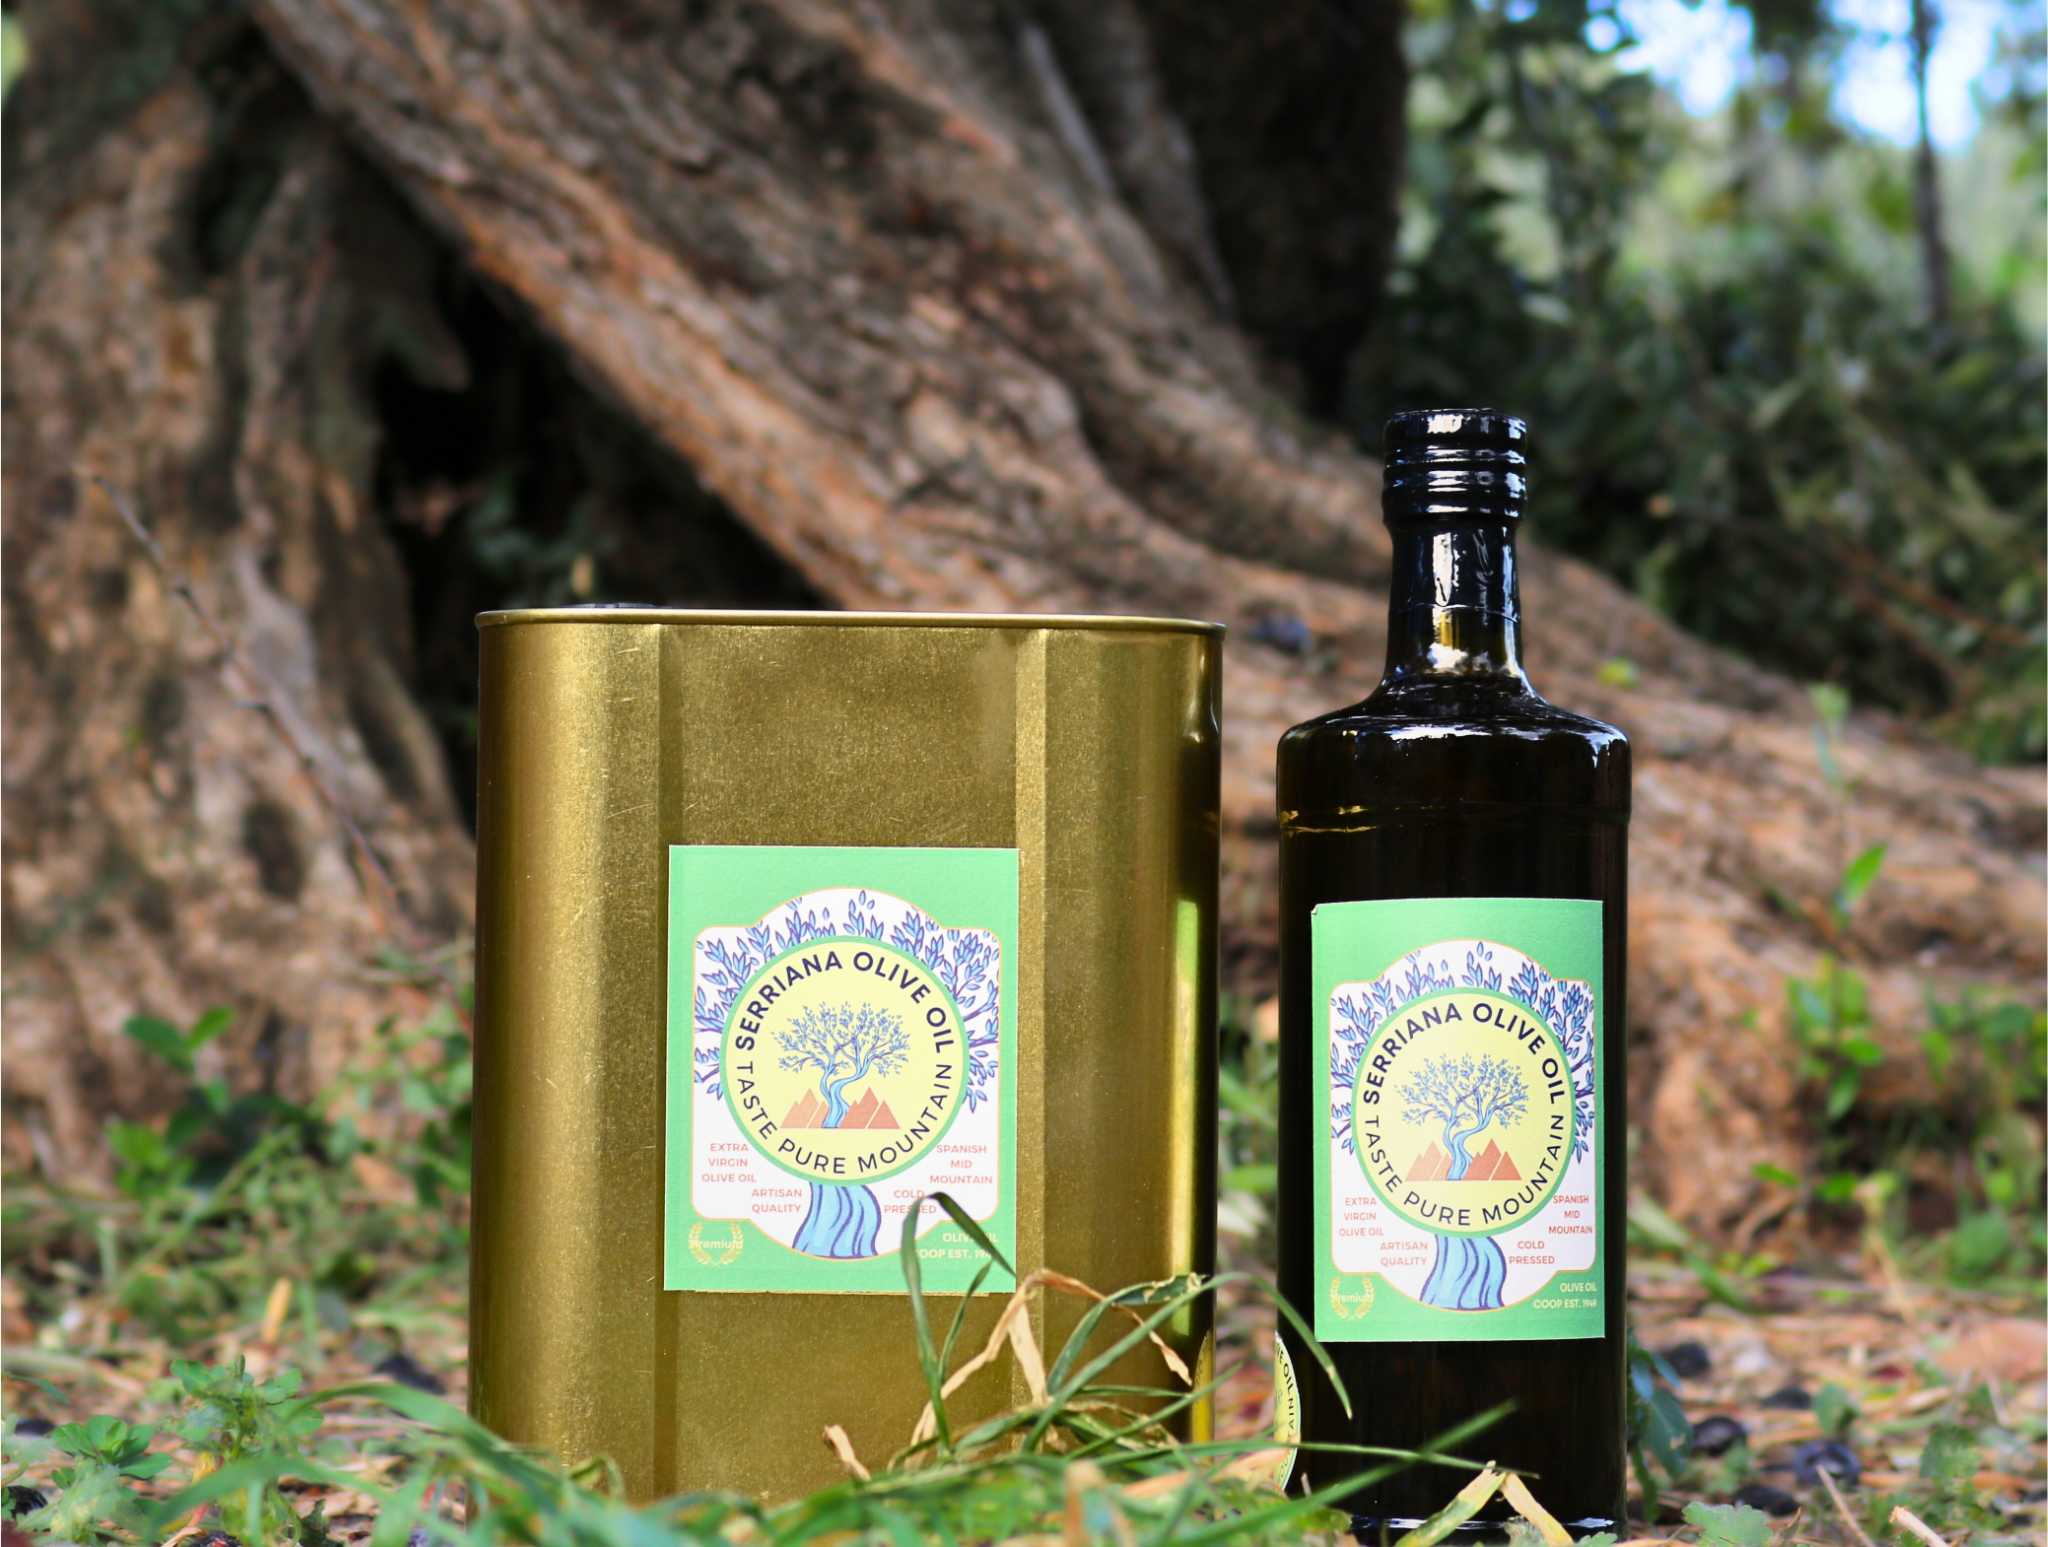 Serriana Olive Oil refill can and bottle in olive grove